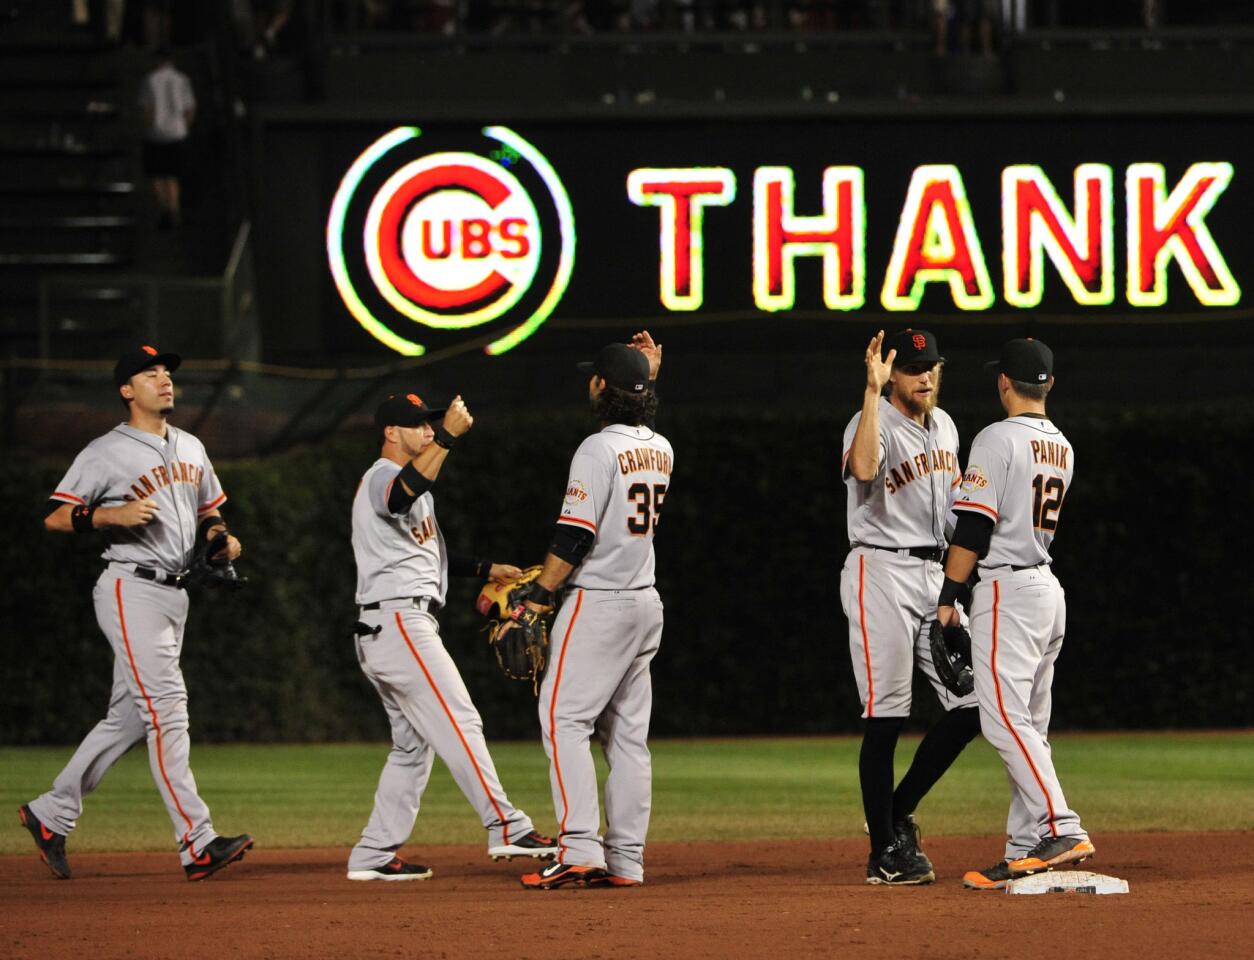 The Giants celebrate their win against the Cubs on Wednesday.